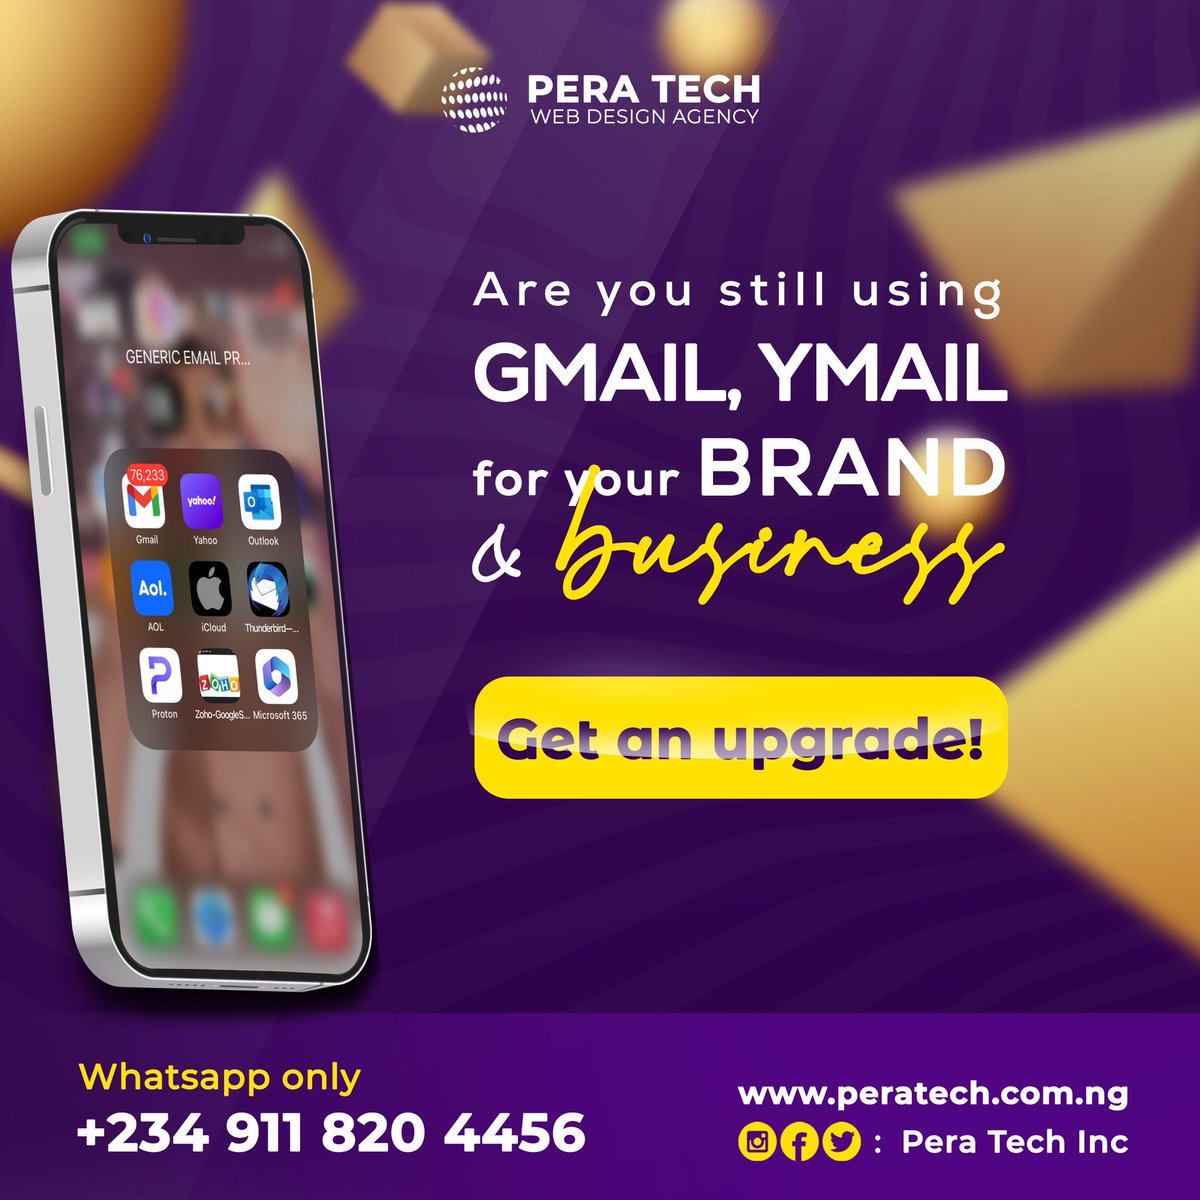 Having a custom email address for your business or brand is a crucial component of building a professional and credible online presence. 
#CustomEmail #Branding #Professionalism #OnlinePresence #BusinessIdentity #Credibility #Consistency #EmailMarketing #BrandIdentity #viral